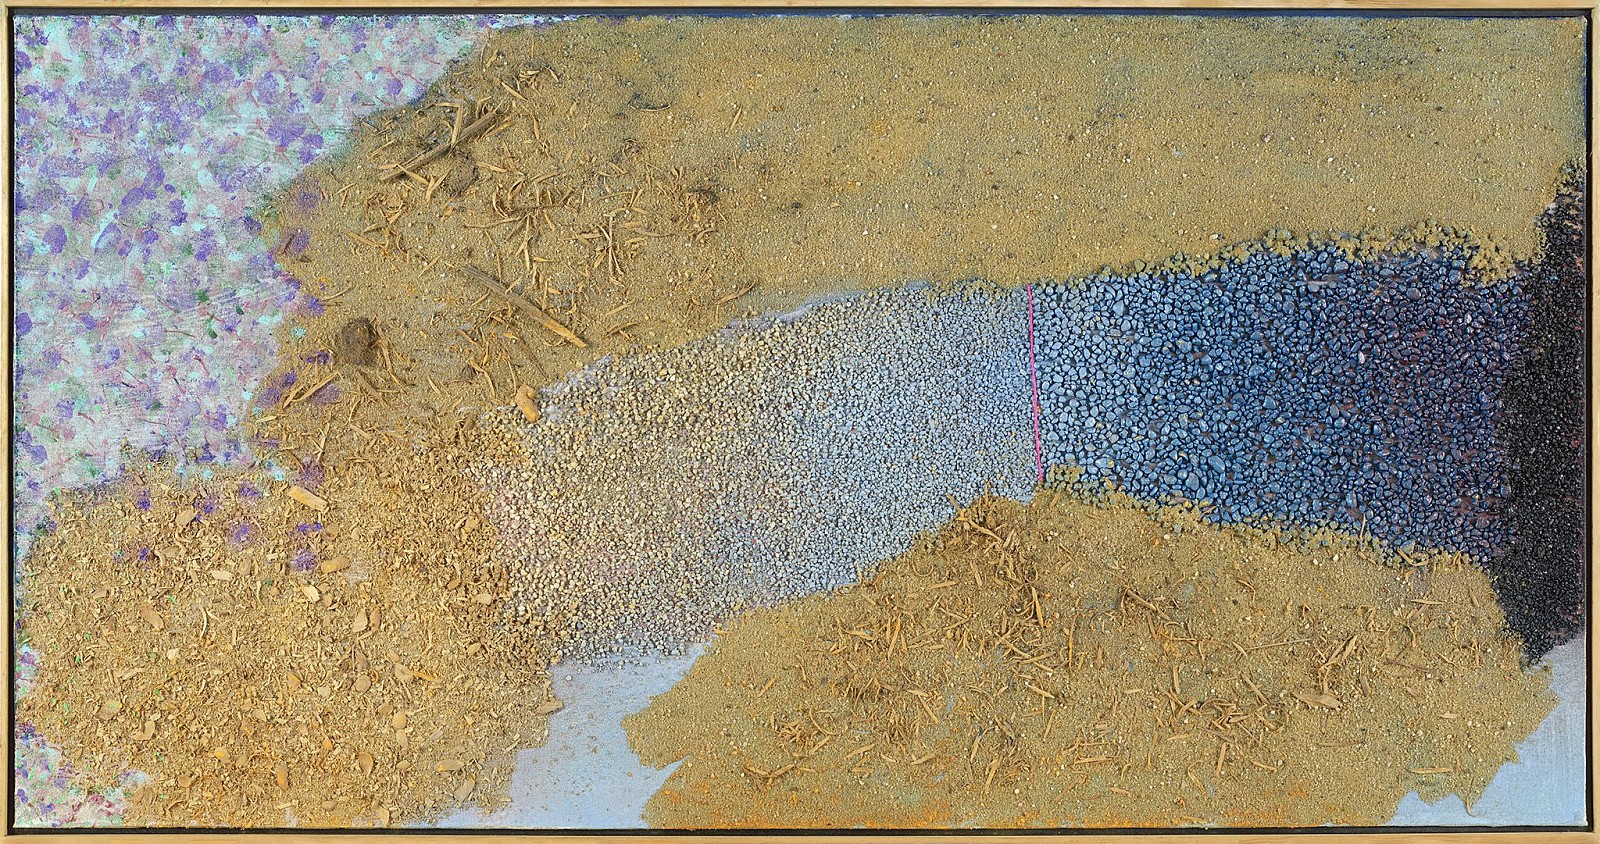 Stanley Boxer, Anoonsblush, 1998
Oil and mixed media on canvas, 27 5/8 x 52 3/4 in. (70.2 x 134 cm)
BOX-00037